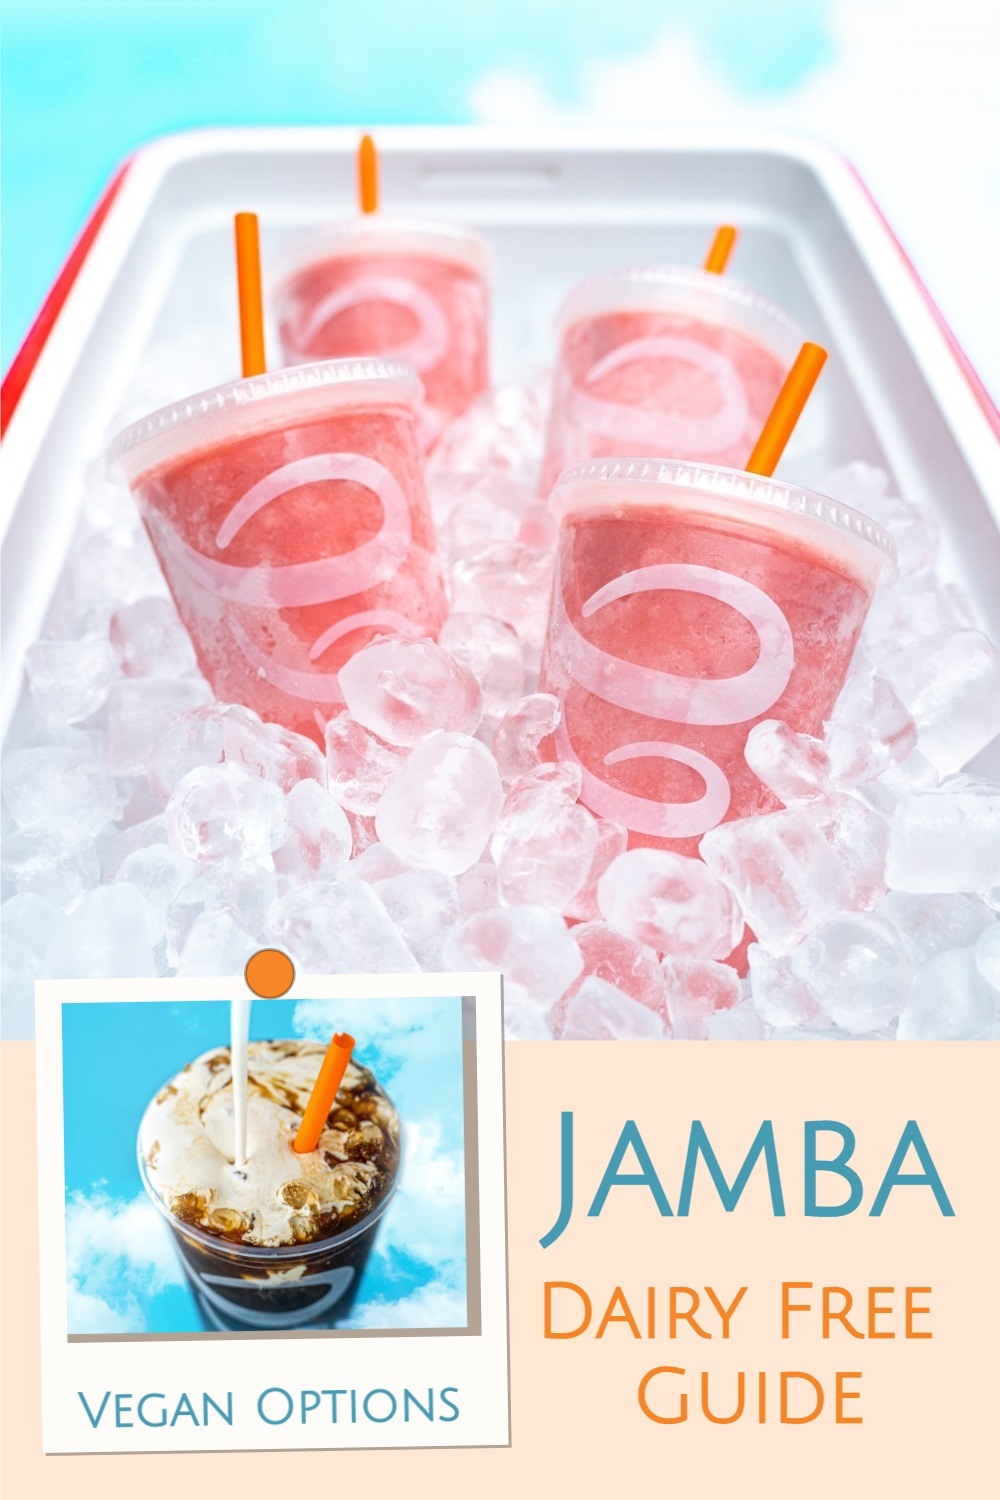 Jamba Dairy-Free Menu Guide with Vegan Options - Jamba now serves Oatmilk Ice Cream for smoothies + Dairy-Free Cloud Whip for Iced Coffee and Tea!